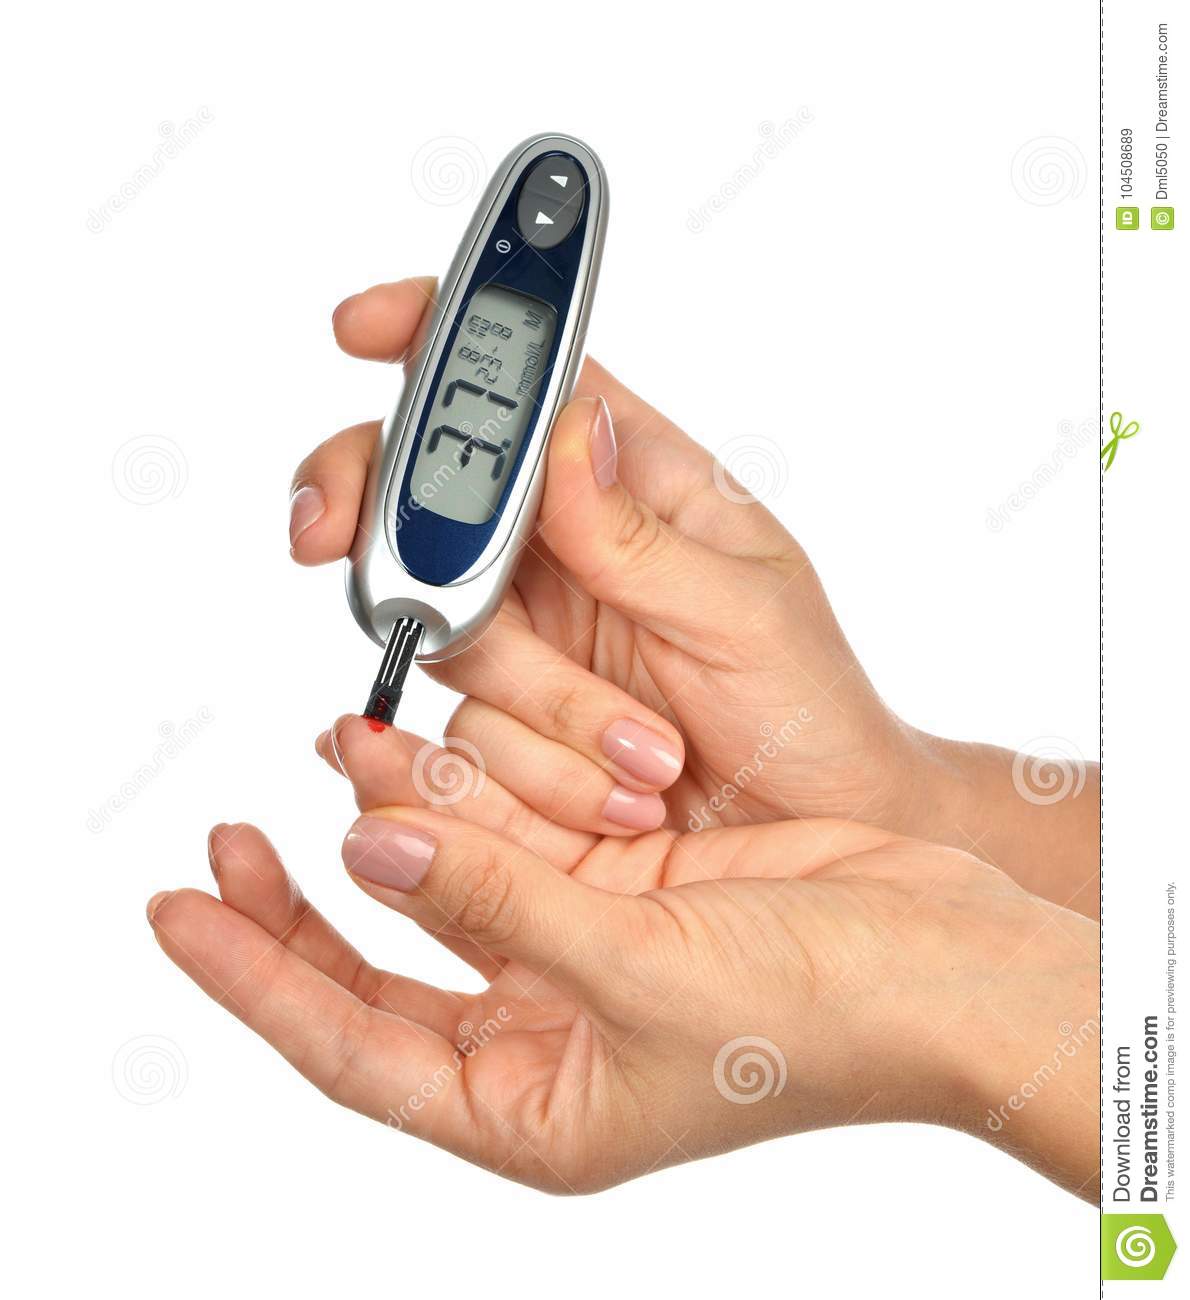 First Type Diabetes Patient Measuring Glucose Level Blood Test Use ...